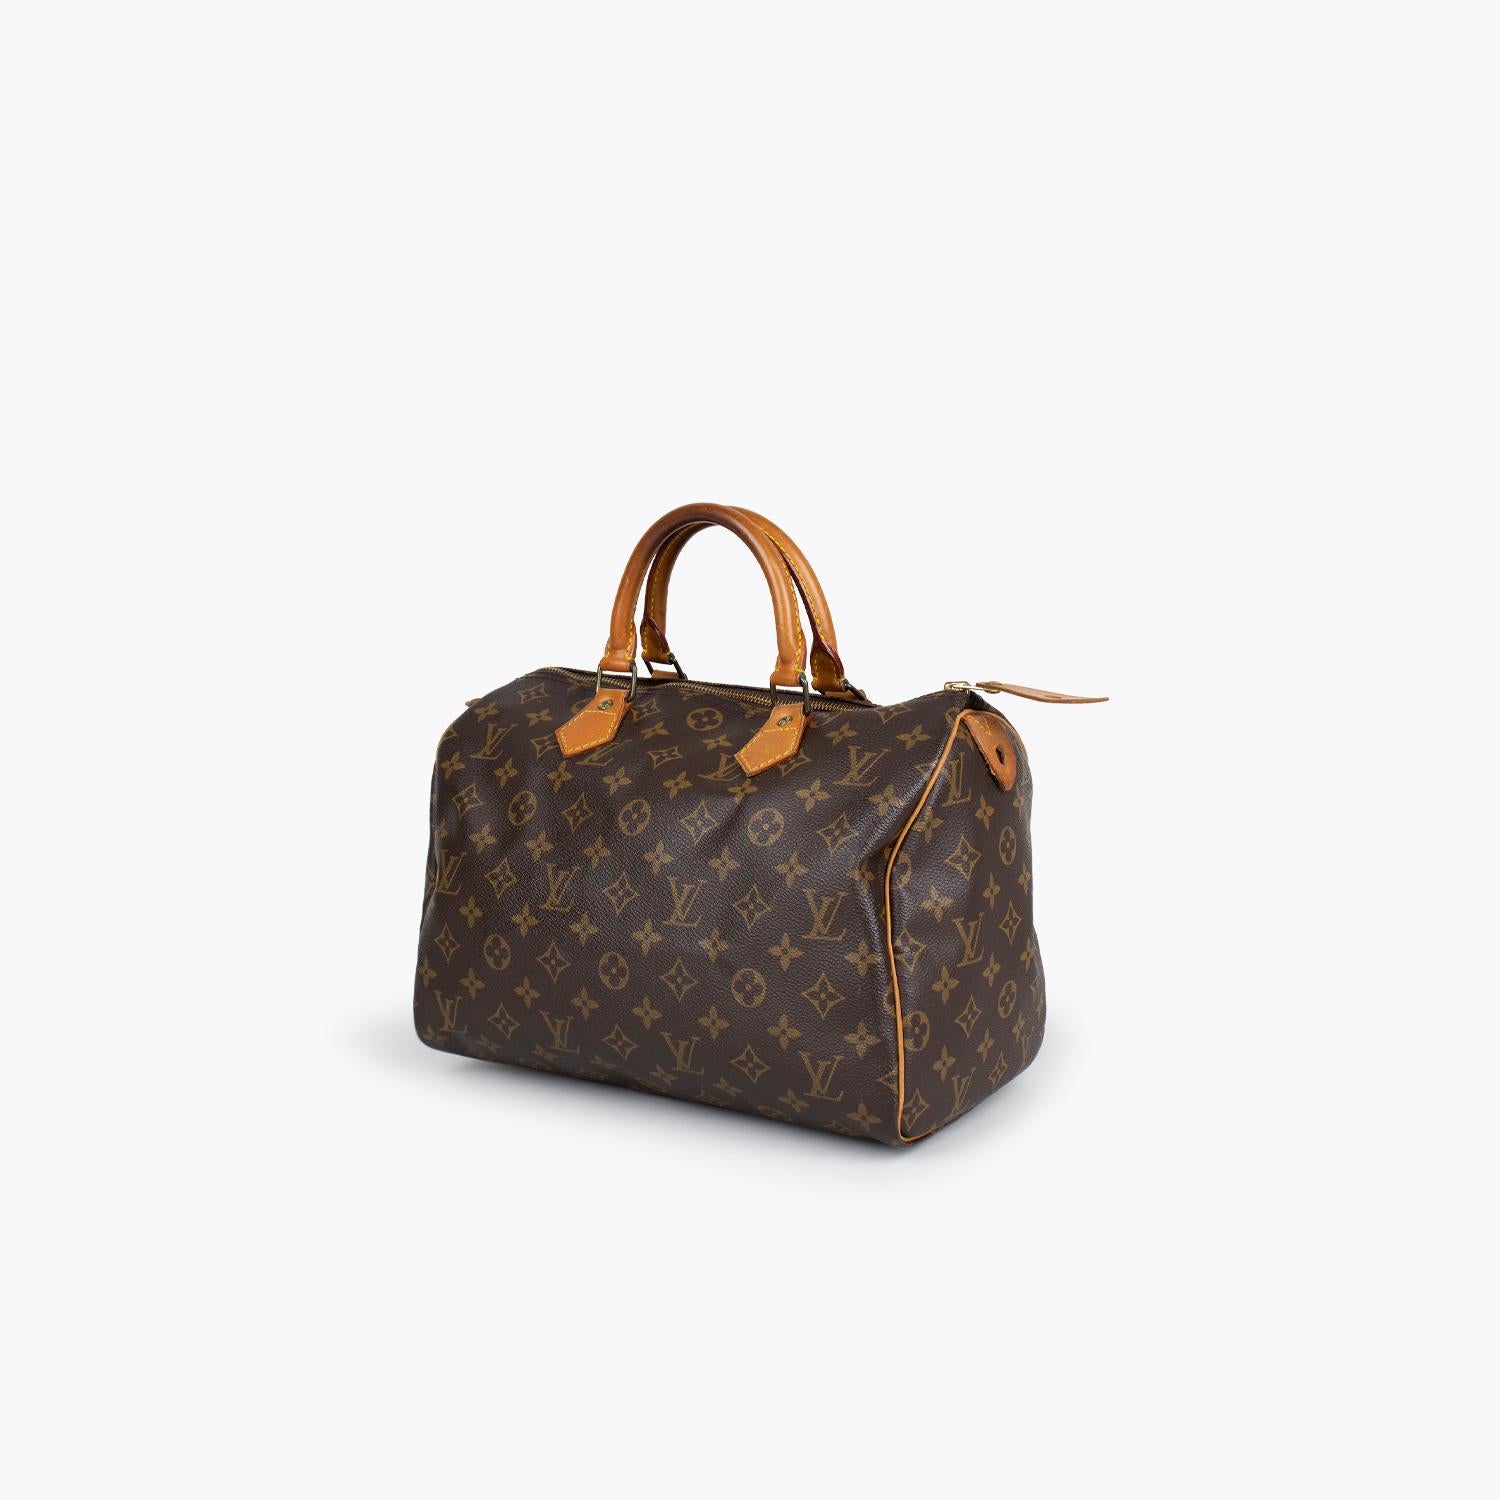 Brown and tan monogram coated canvas Louis Vuitton Speedy 30 with

- Brass hardware
- Tan vachetta trim
- Dual rolled top handles
- Brown canvas interior
- Single interior slit pocket and zip closure at top

Overall Preloved Condition: Very